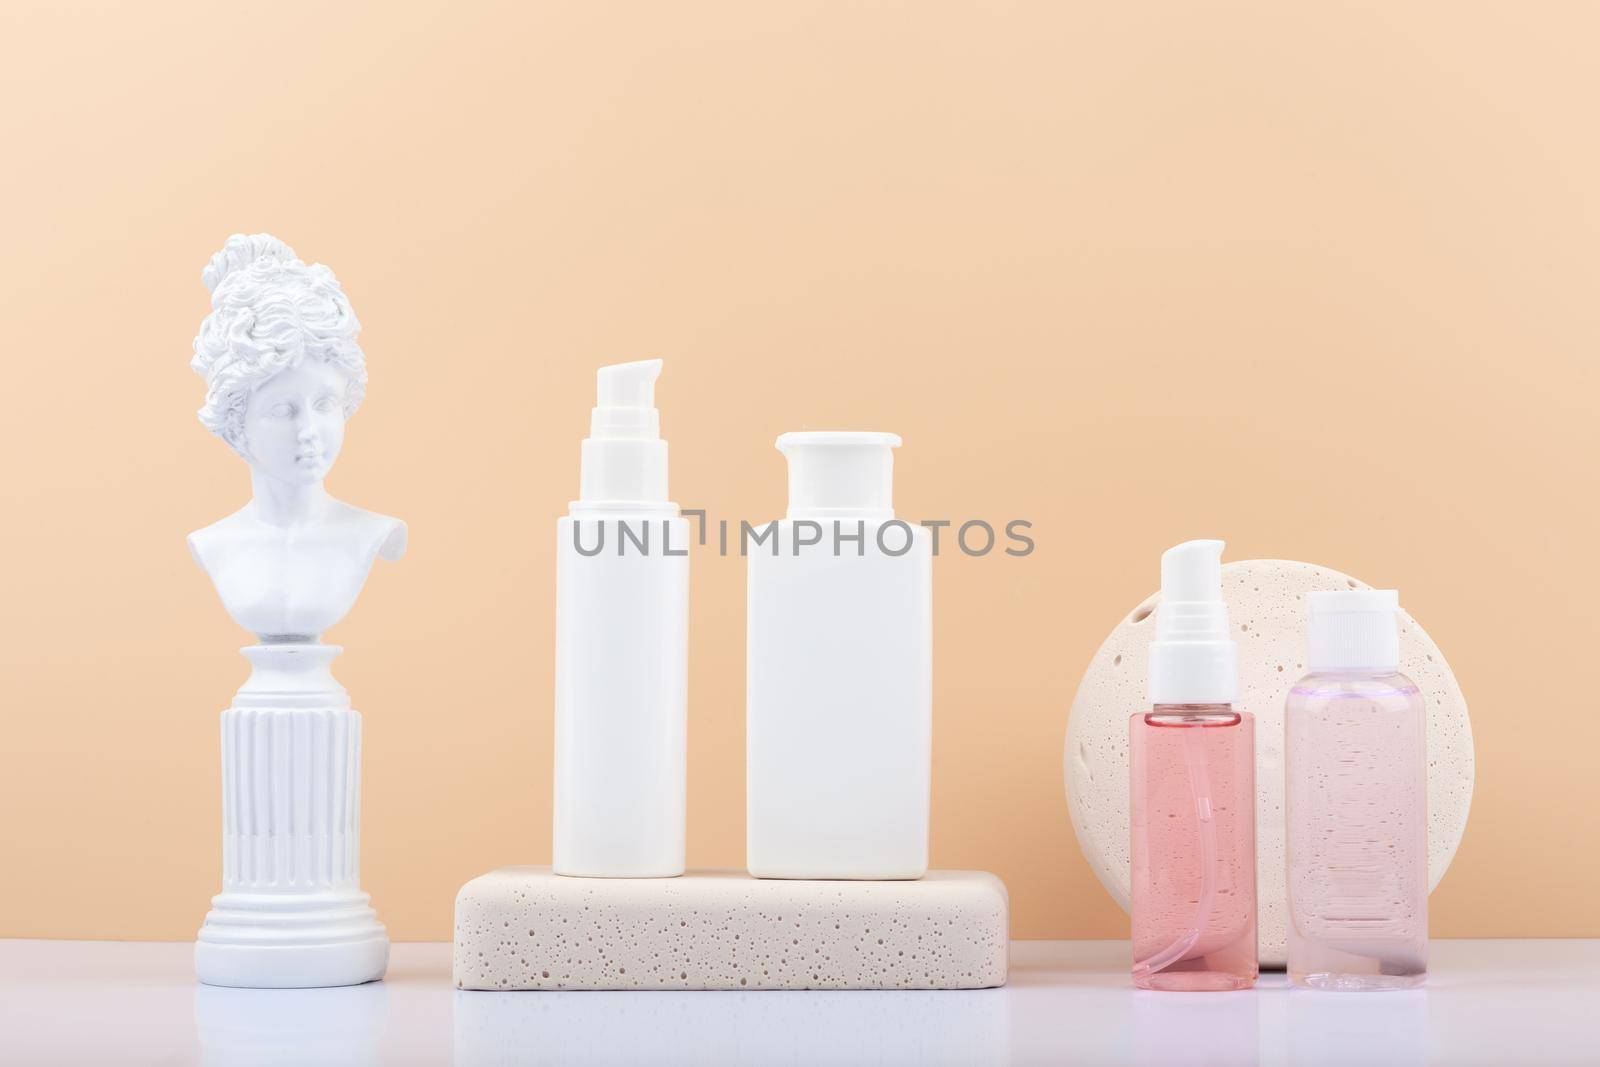 Set of cosmetic products with gypsum figure and geometric podiums on white table against beige background. by Senorina_Irina